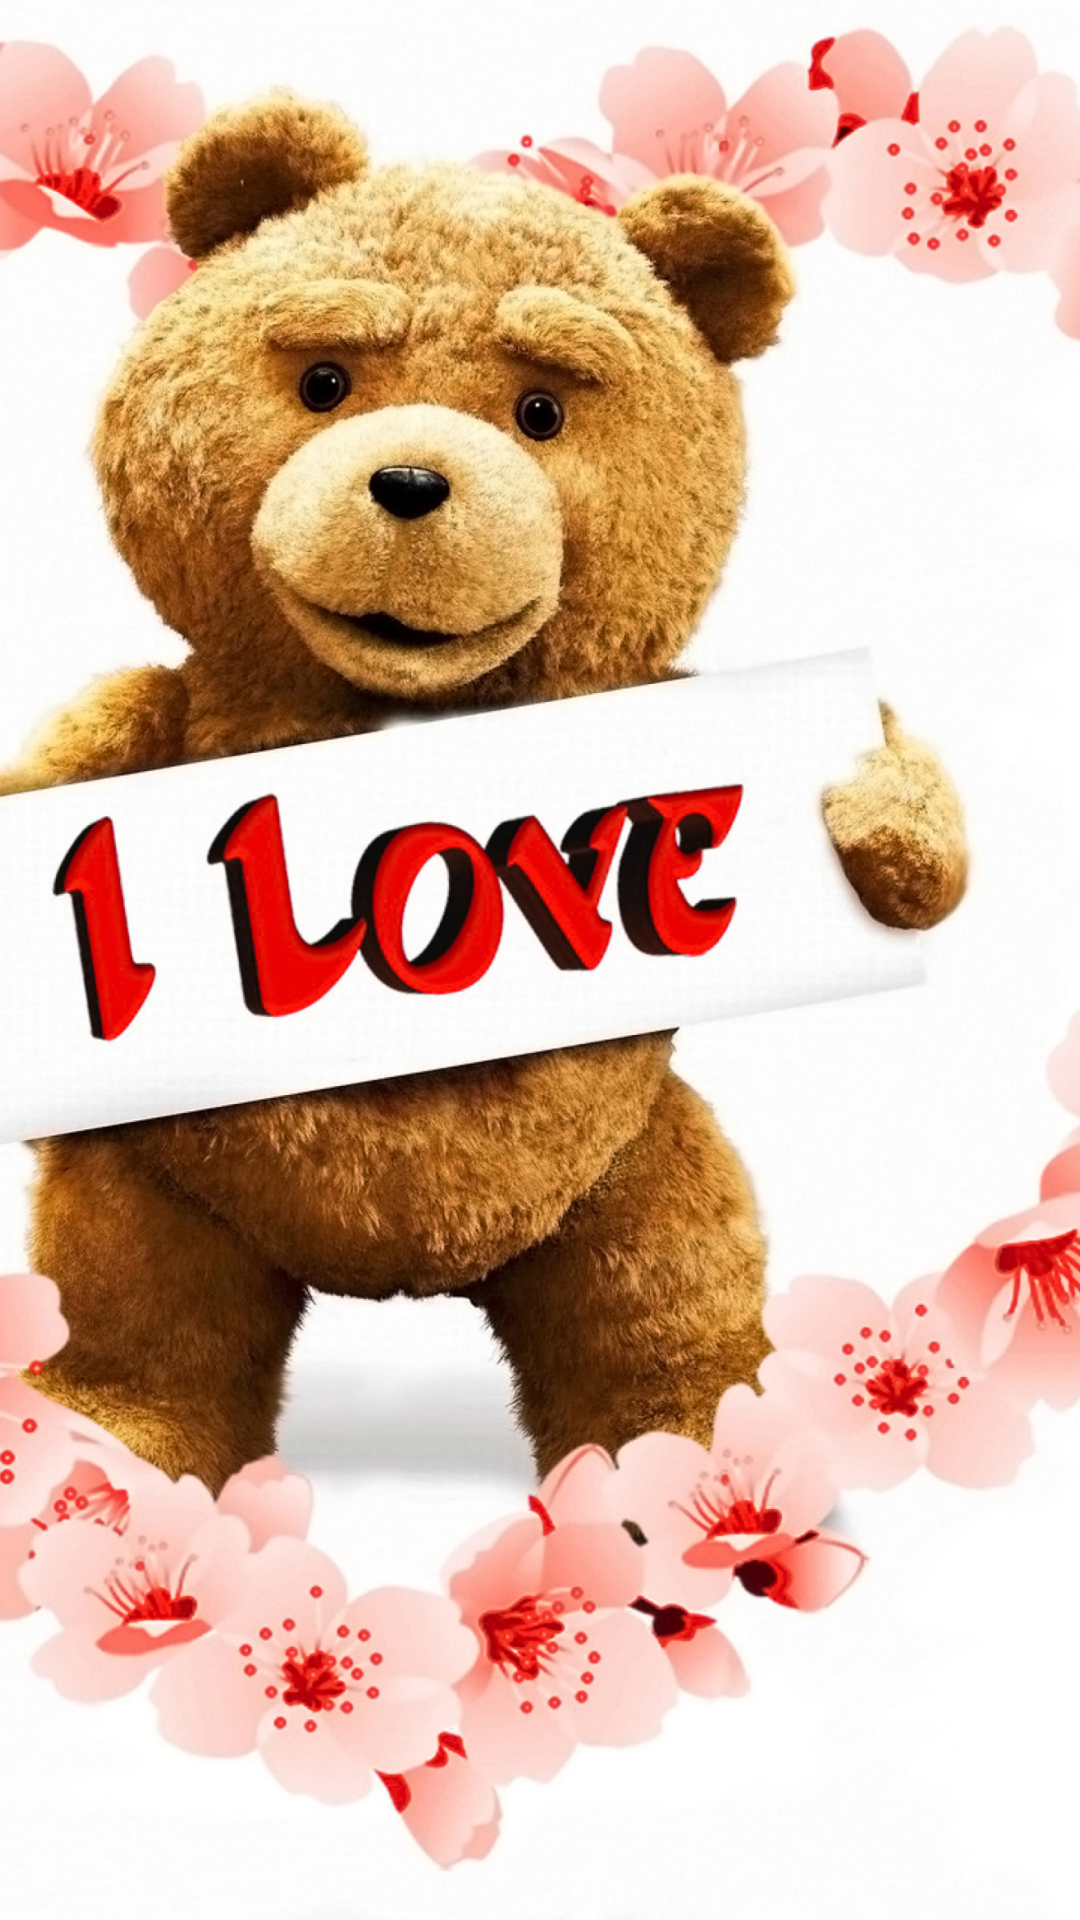 Love Ted wallpaper 1080x1920